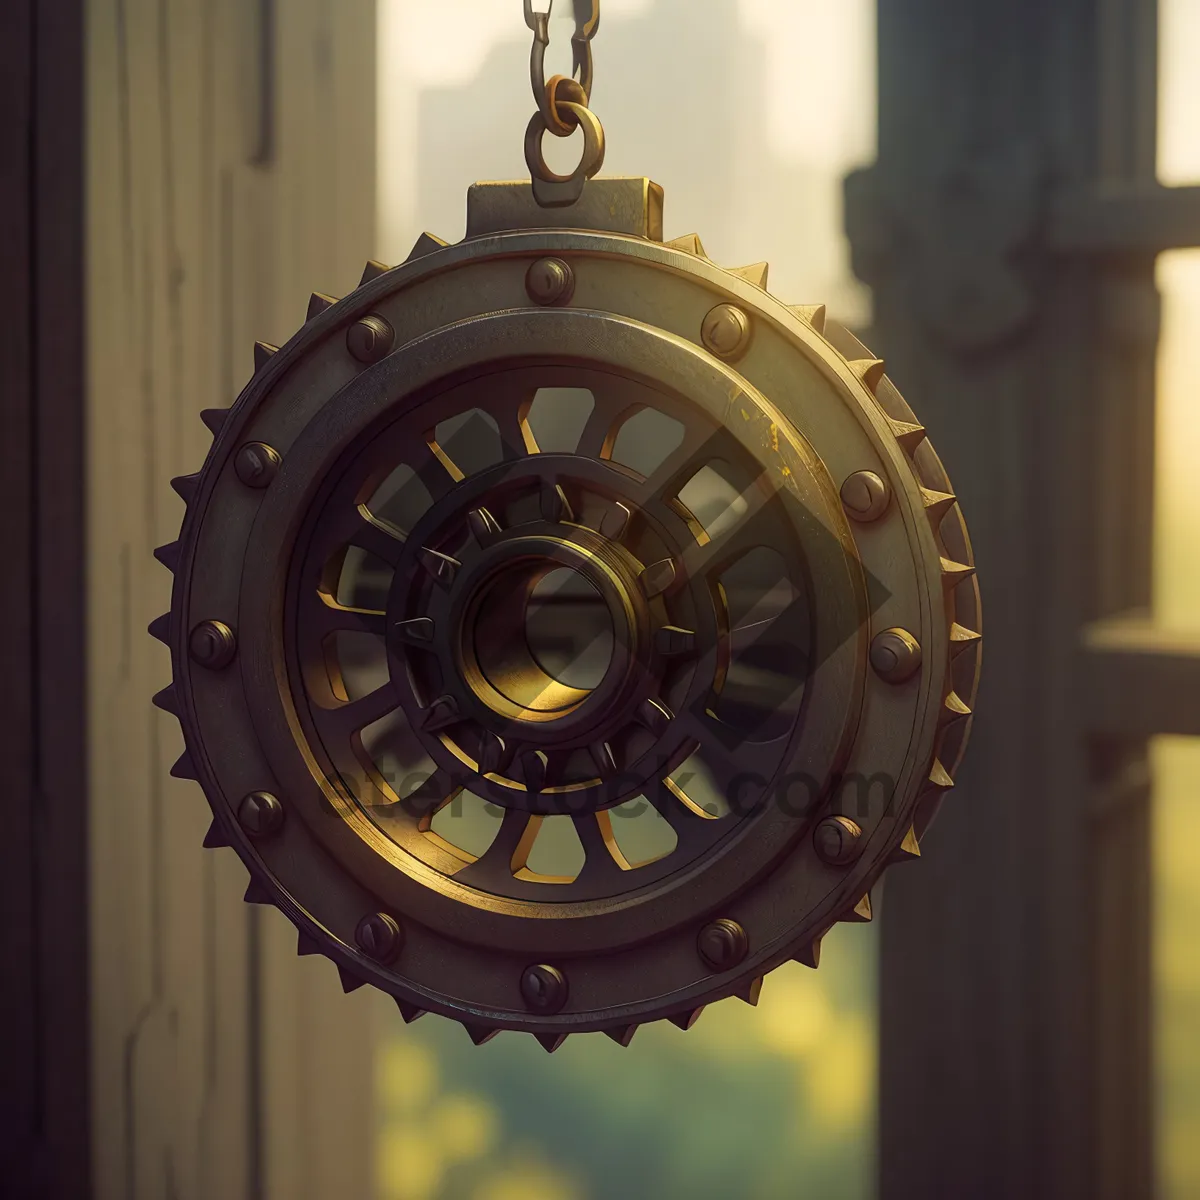 Picture of Mechanical Gear Clockwork Technology - Vintage Industry